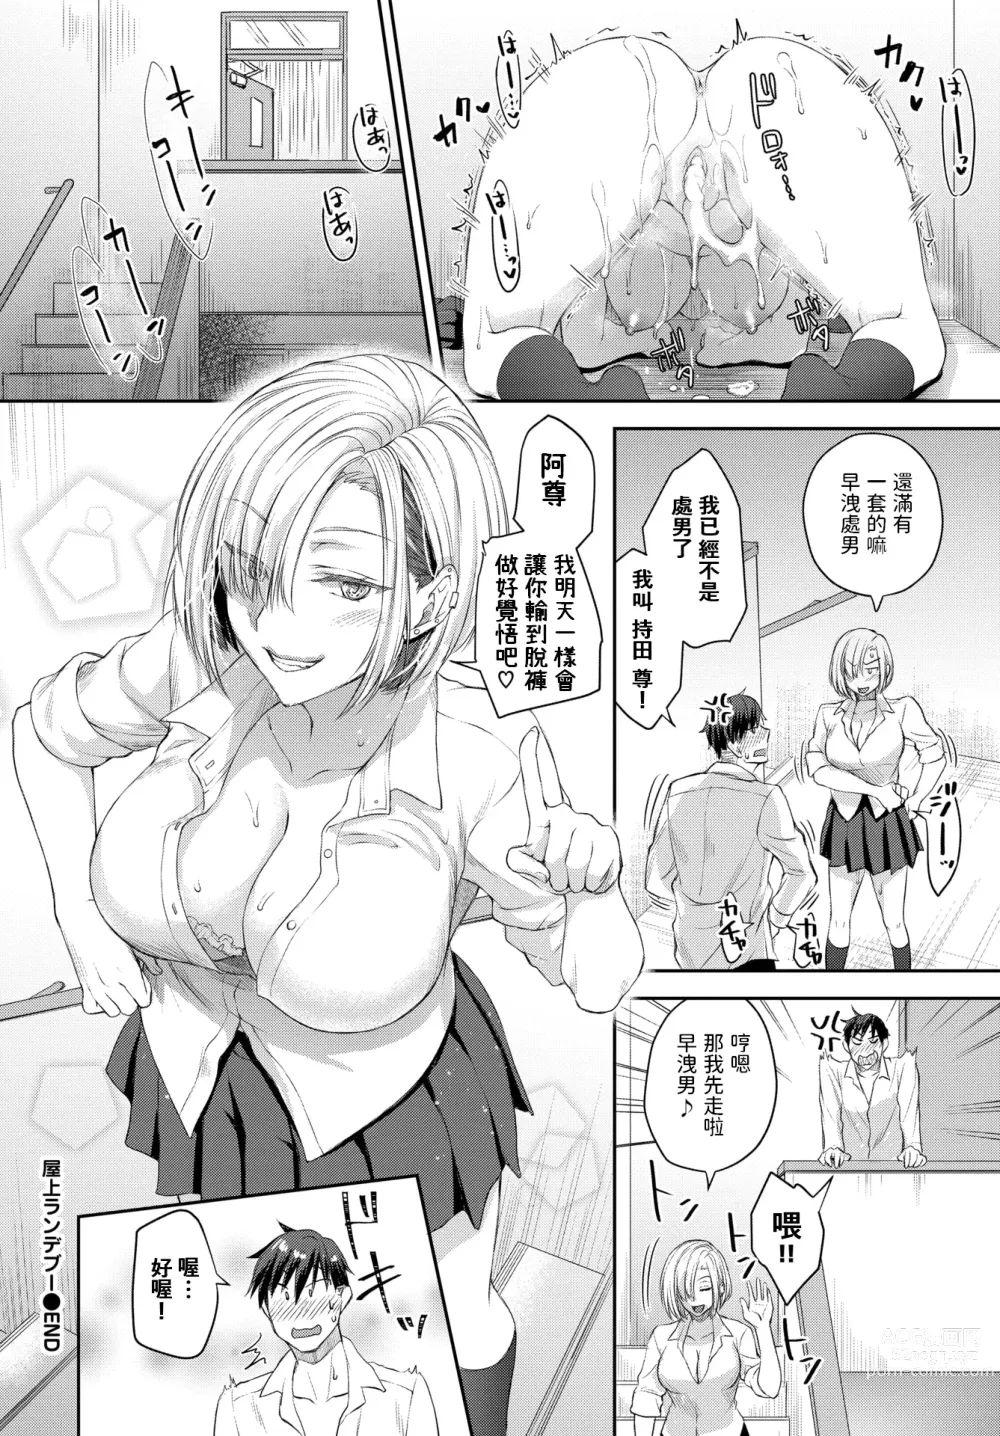 Page 26 of doujinshi 屋上ランデブー